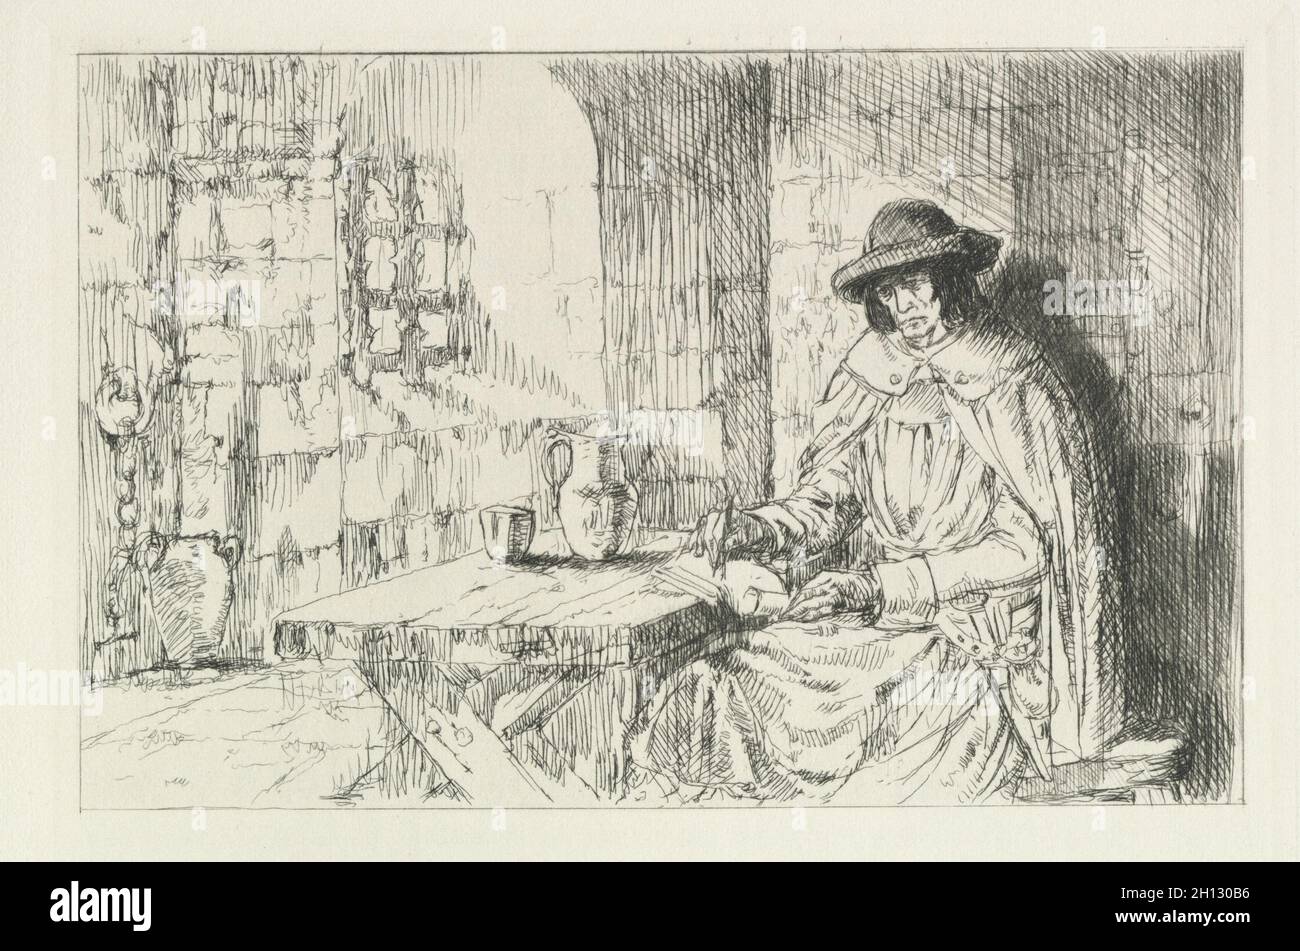 Le Drageoir aux épices by J. K. Huysmans: p. 99, 1929. Auguste Brouet (French, 1872-1941), J.K. Huysmans (French). Book containing 54 etchings; overall: 28.7 x 23.3 x 4.5 cm (11 5/16 x 9 3/16 x 1 3/4 in.). Stock Photo